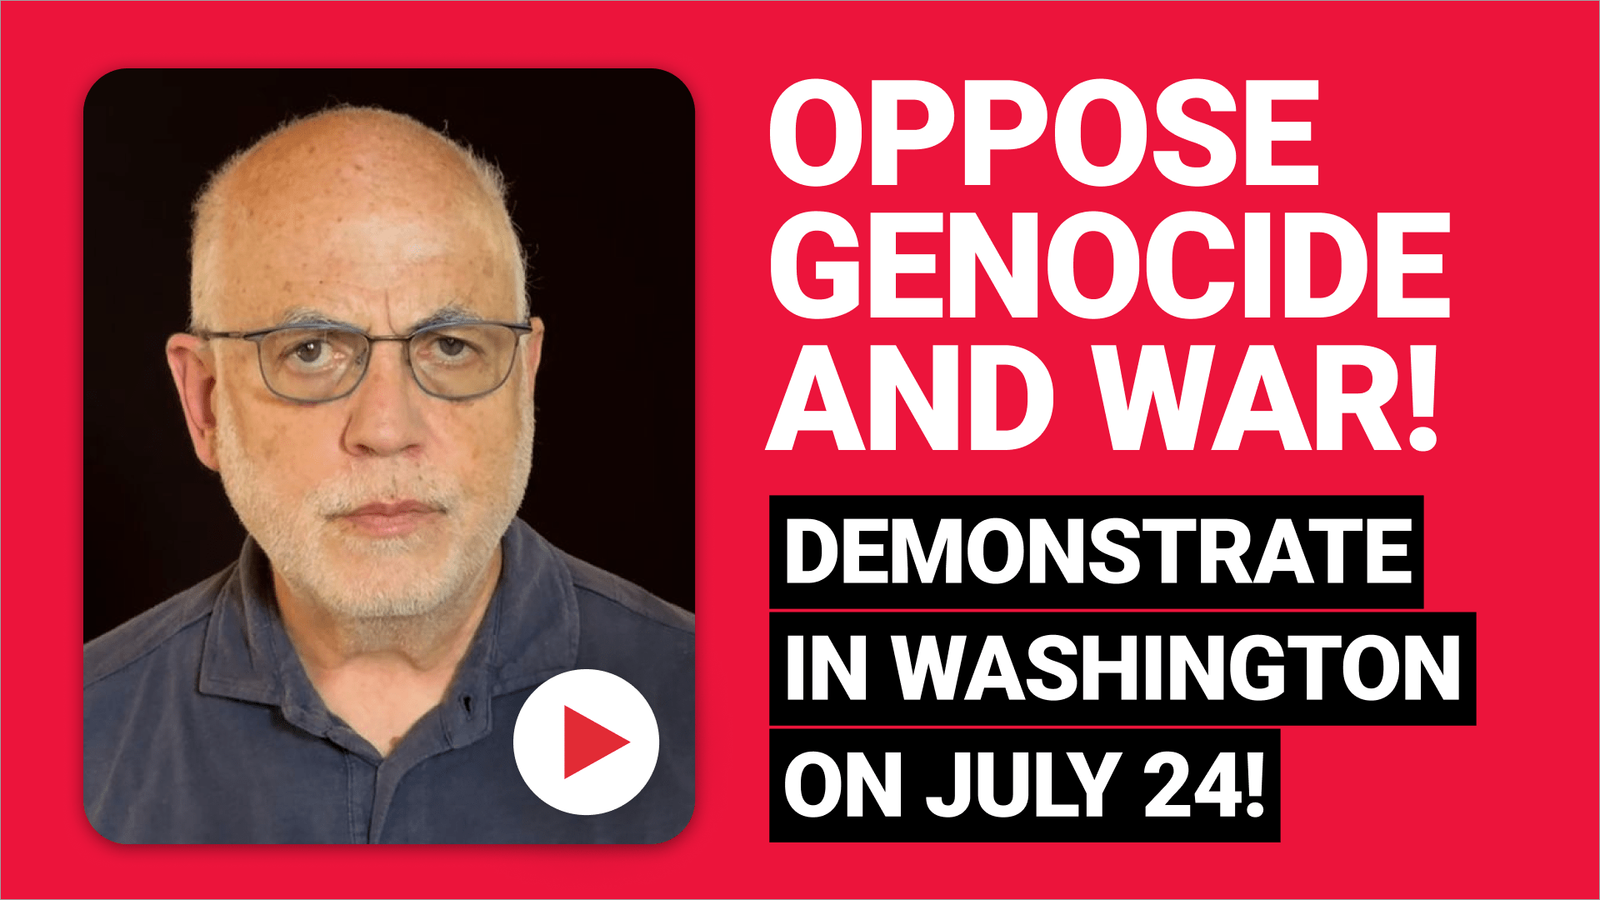 Against genocide and war! Demonstrate in Washington on July 24th!